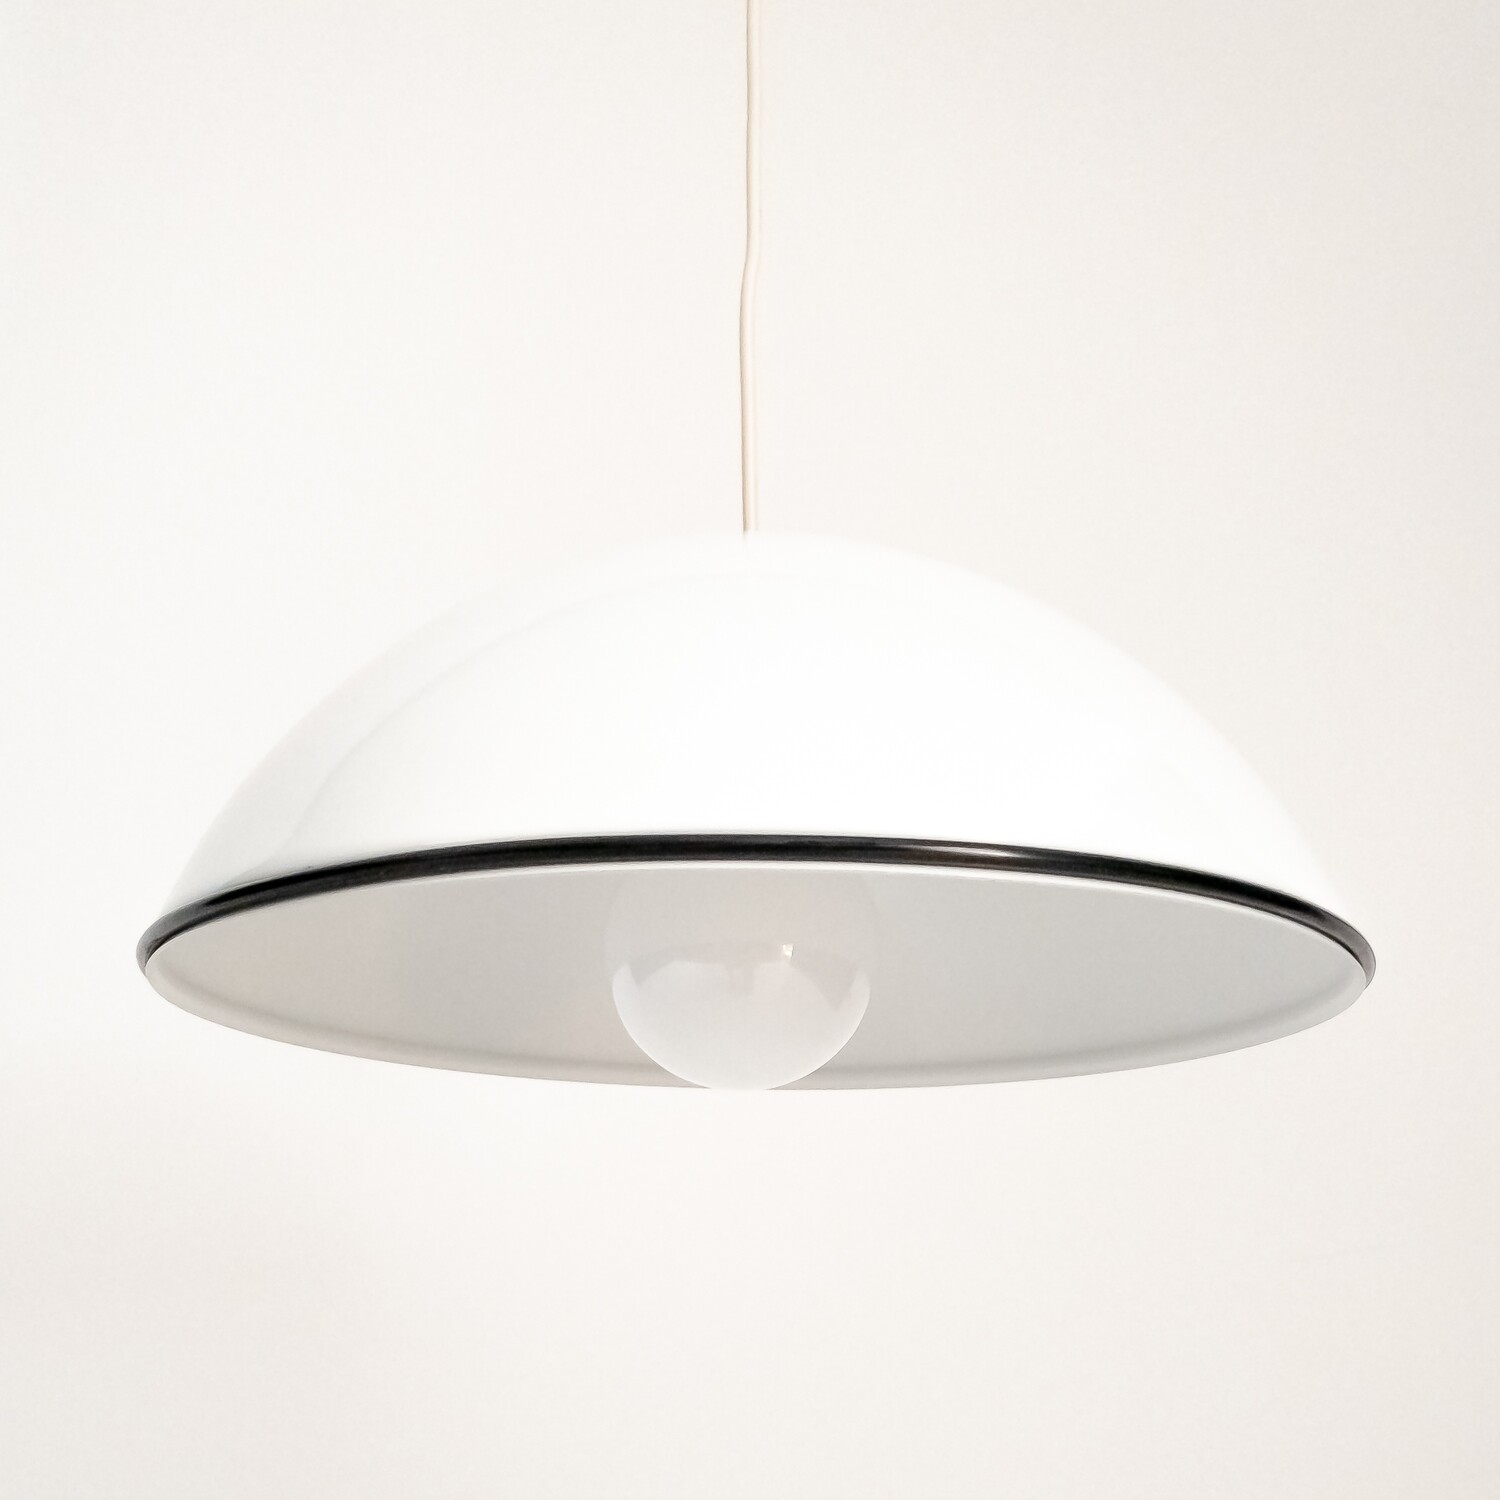 Relemme 74/75 suspension lamp by Achille Castiglioni for Flos, Italy 1960s